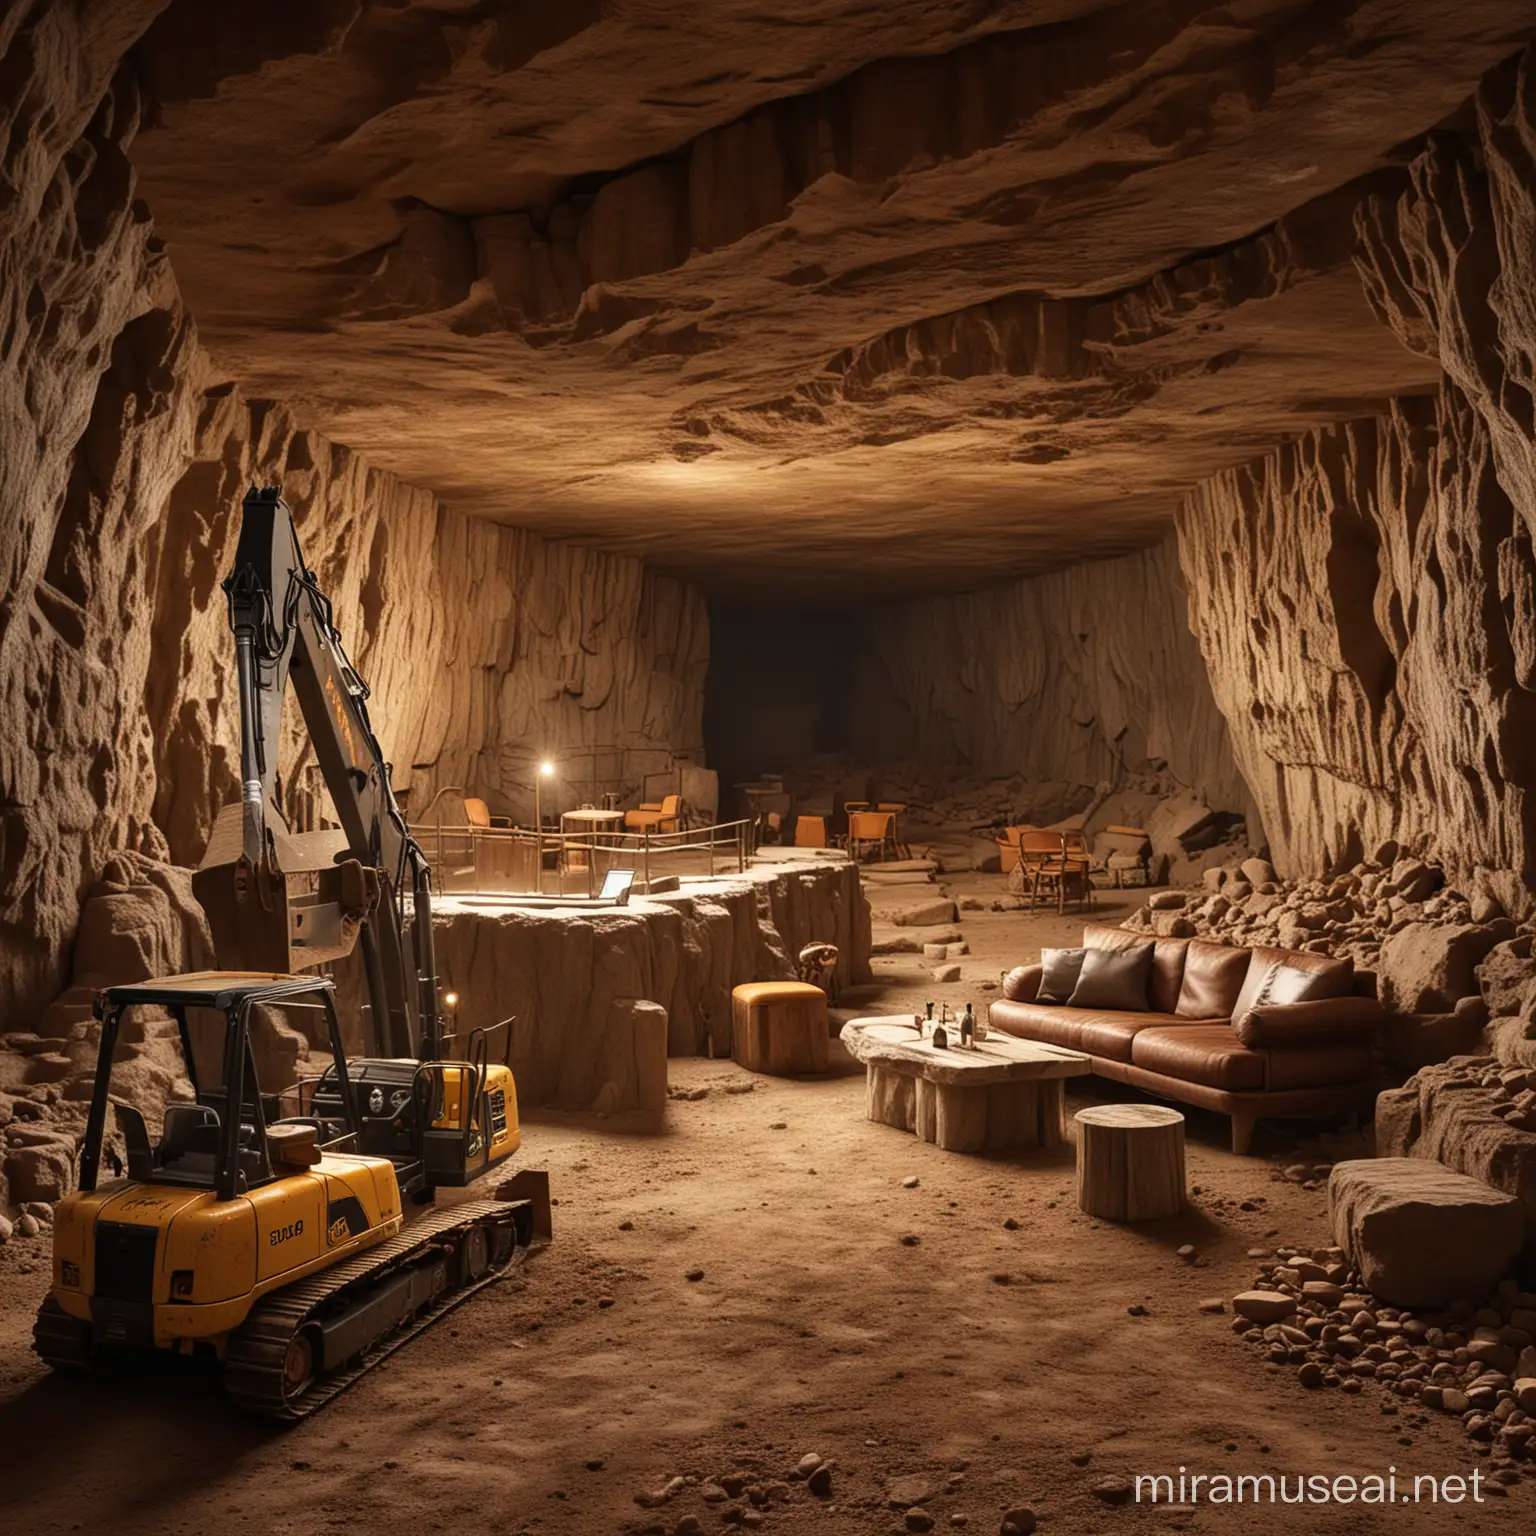 Create an image of a basic cigar lounge in a cave carved into a cliff side by a mini excavator